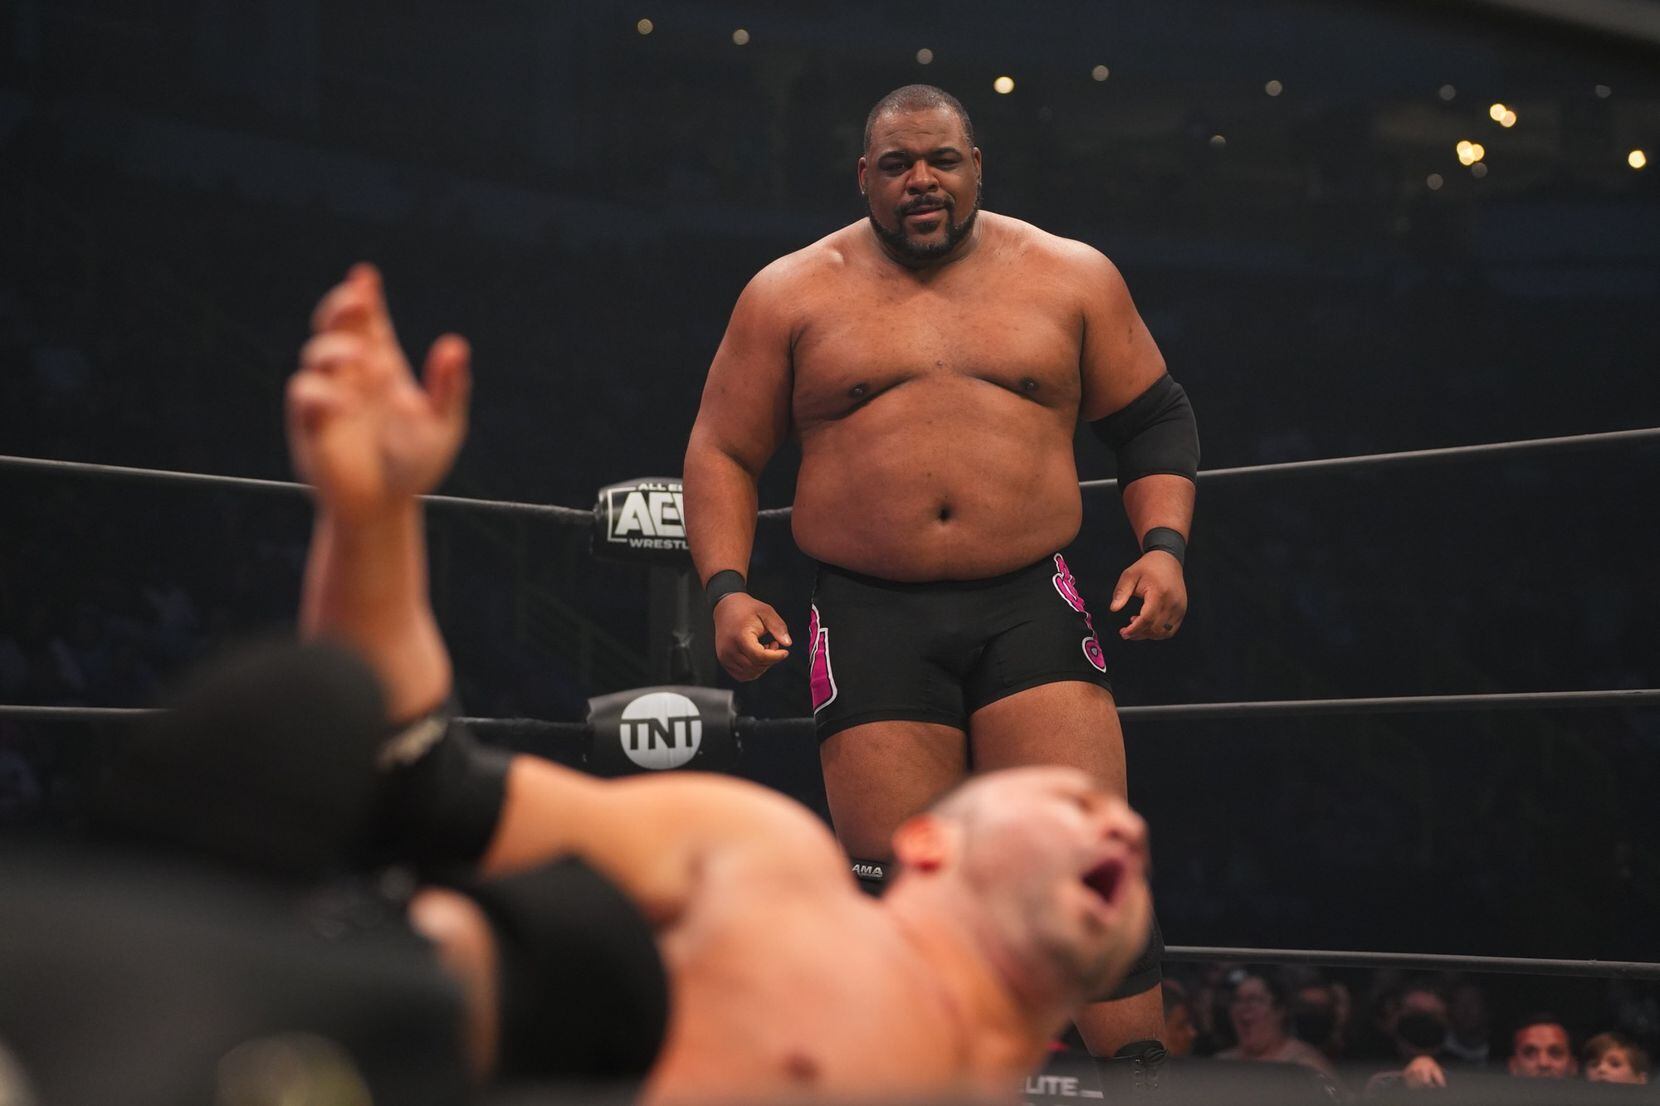 AEW's QT Marshall reacts to taking a move from Keith Lee.